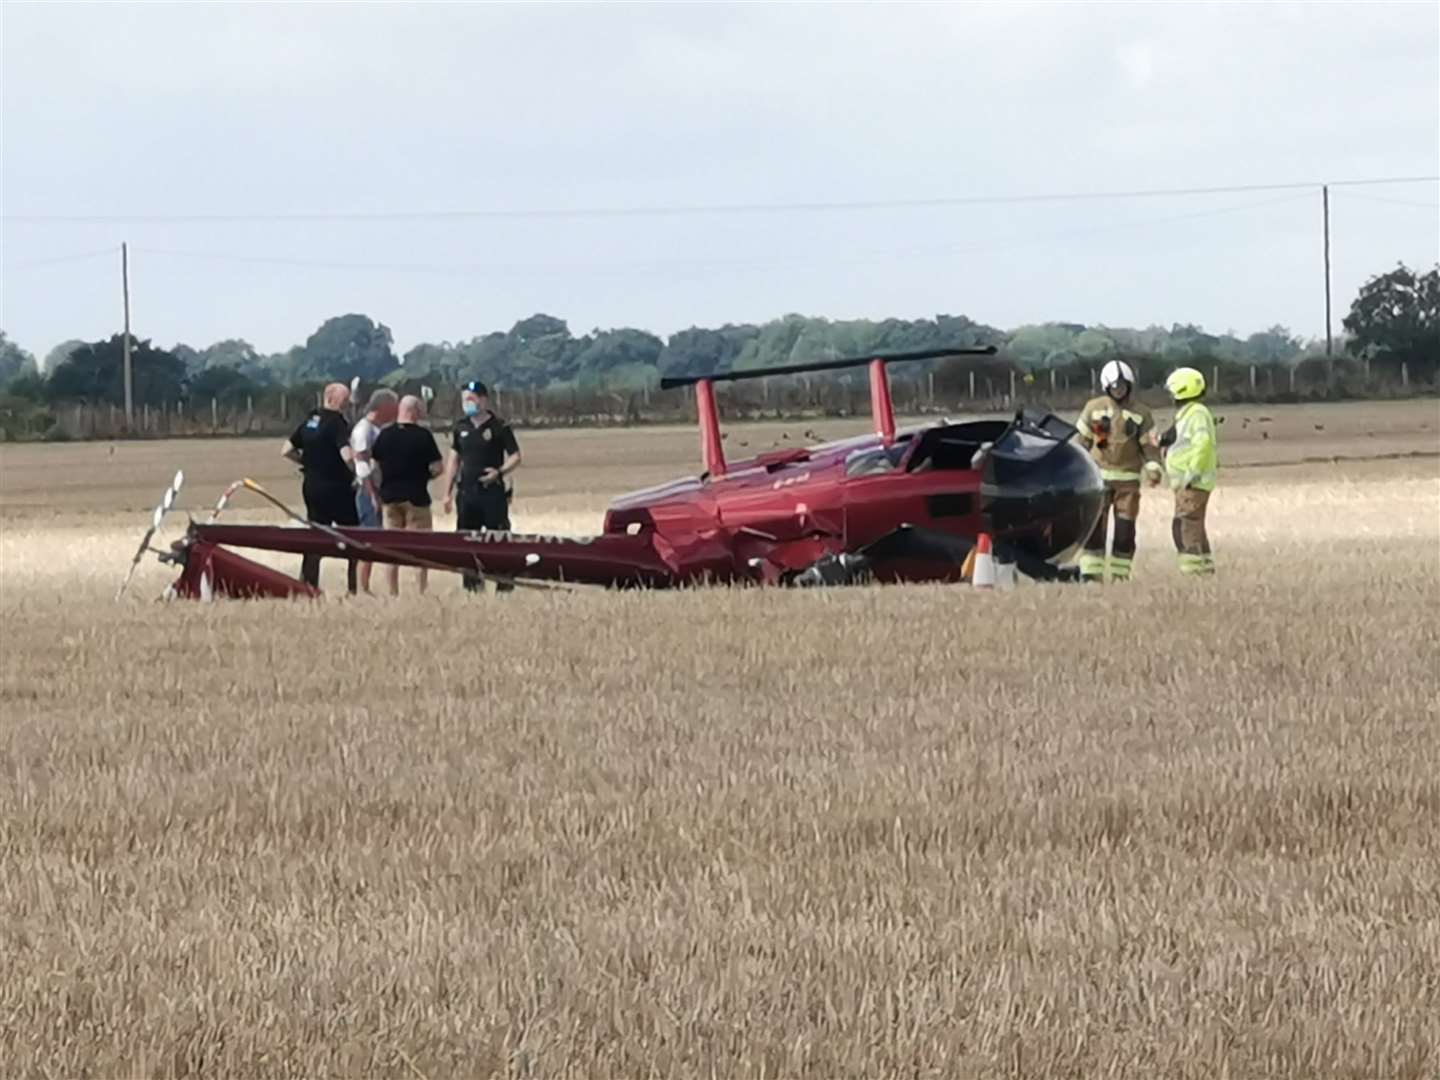 The helicopter crashed into a field Picture: Paul Shipley-Weller